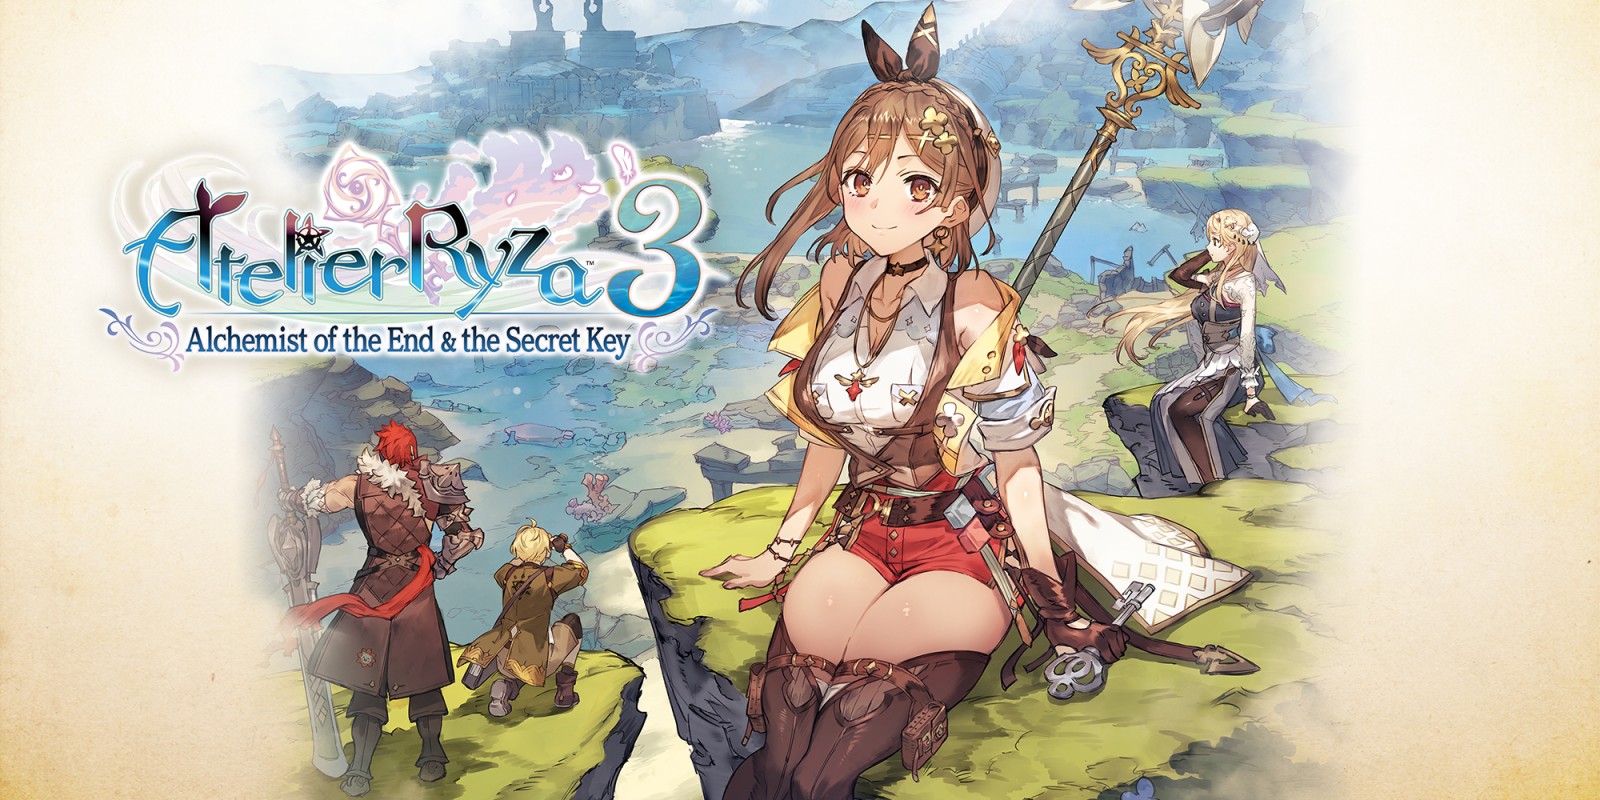 Atelier Ryza 3 presents the ending theme and opens the pre-order campaign